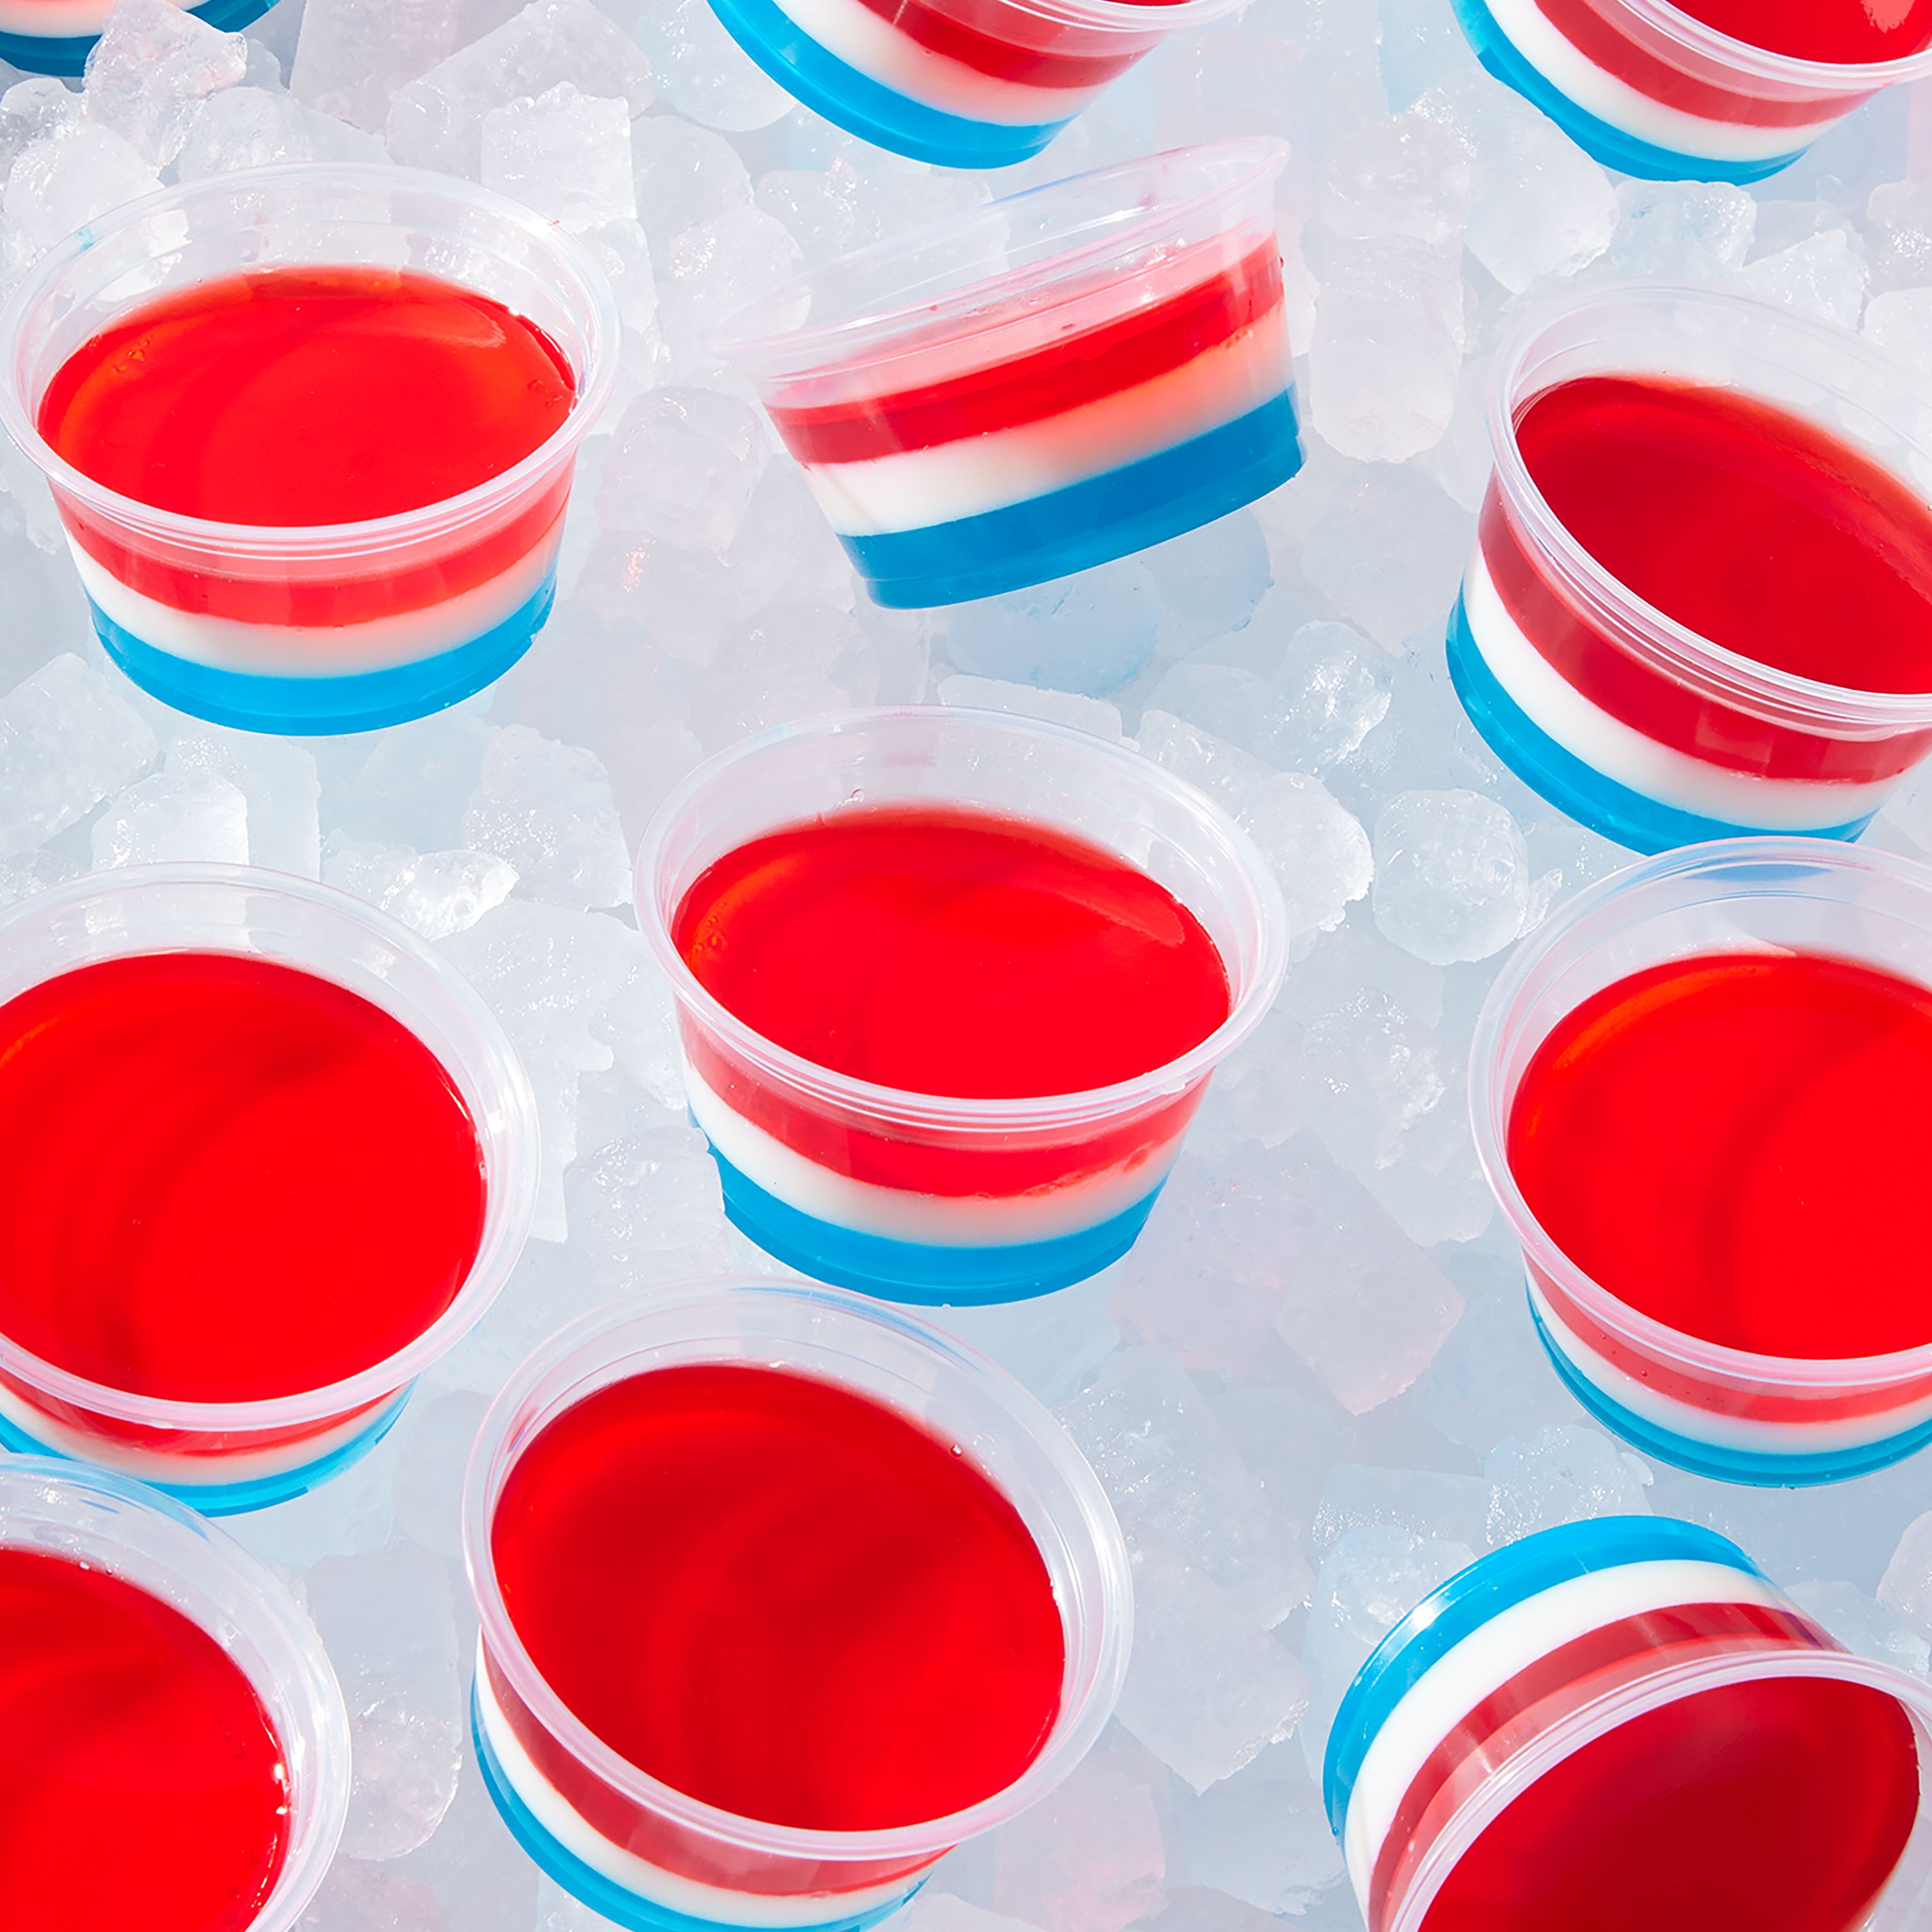 27 Jell-O Shots That Will Get Your July 4th Party Started (& Keep It Going)